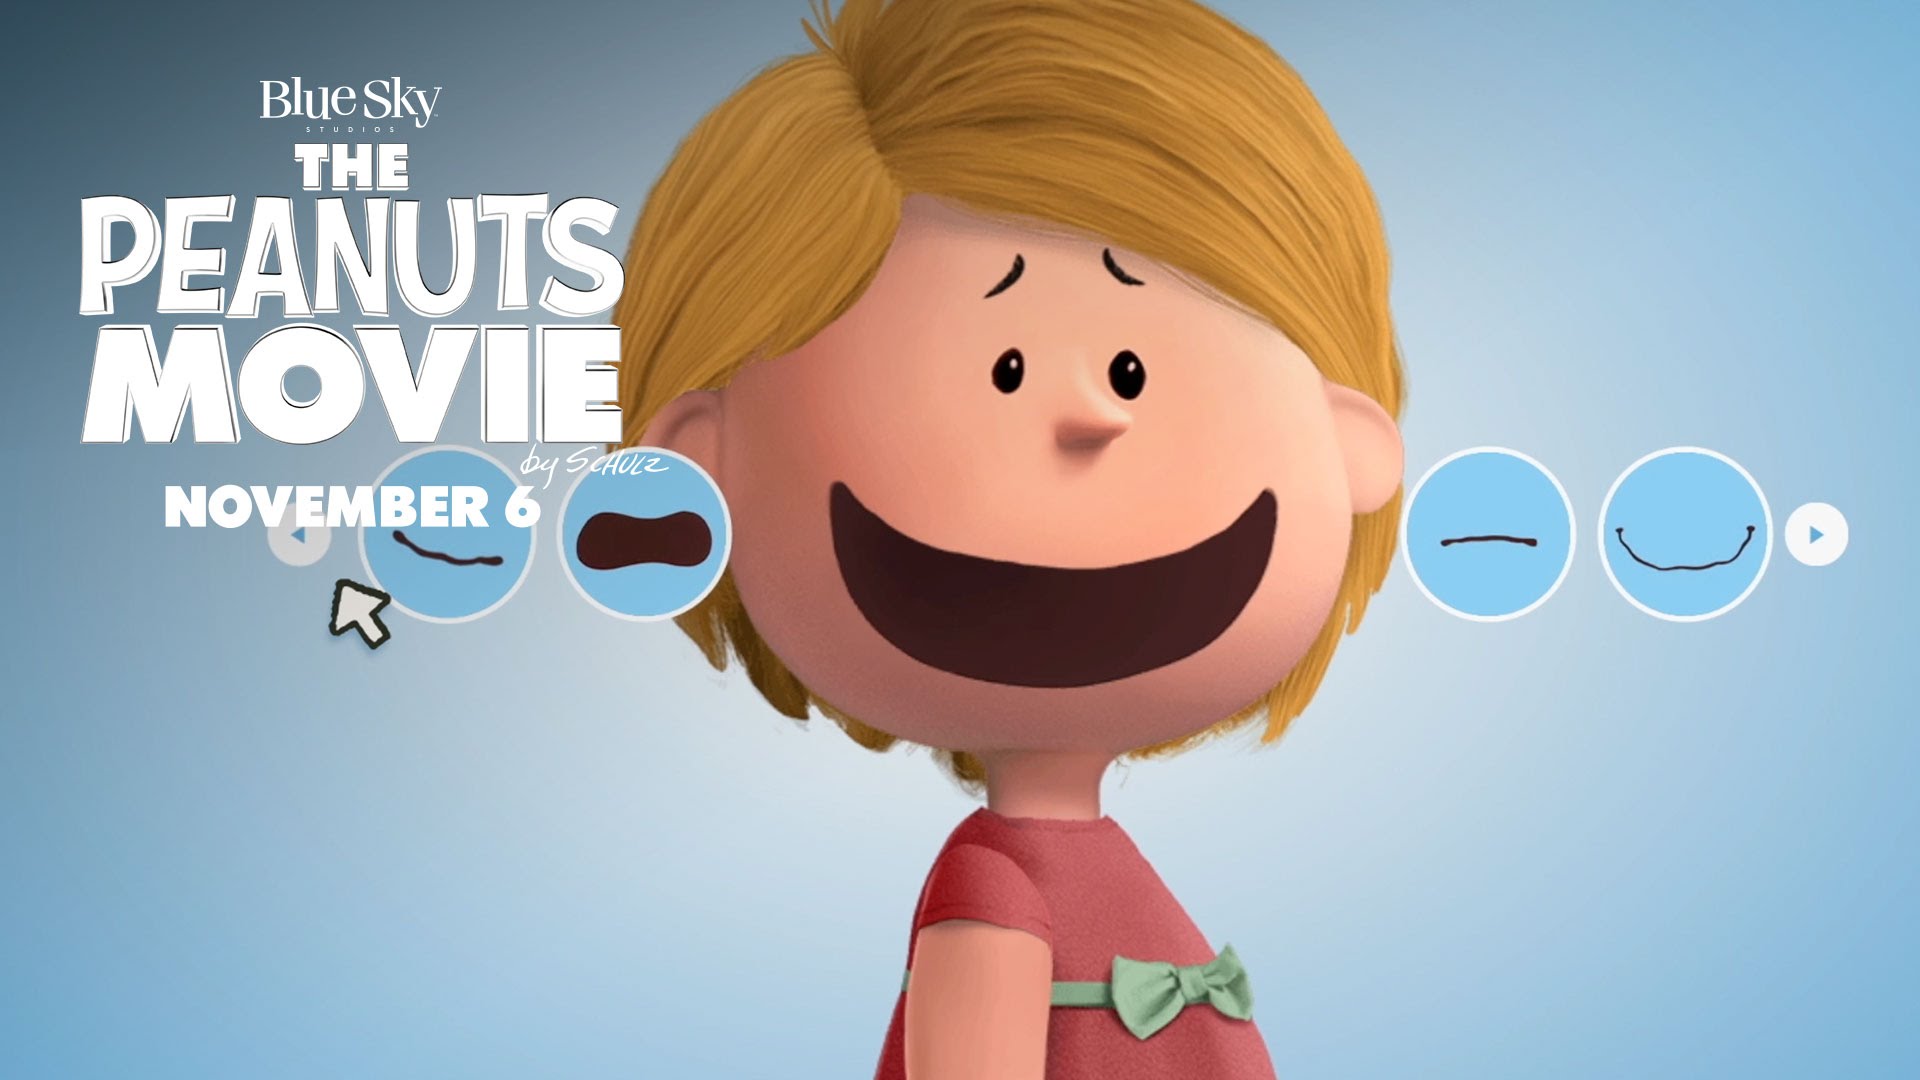 Peanutize Me', A Promotional Web App That Lets Users Turn Themselves Into a  Peanuts Character